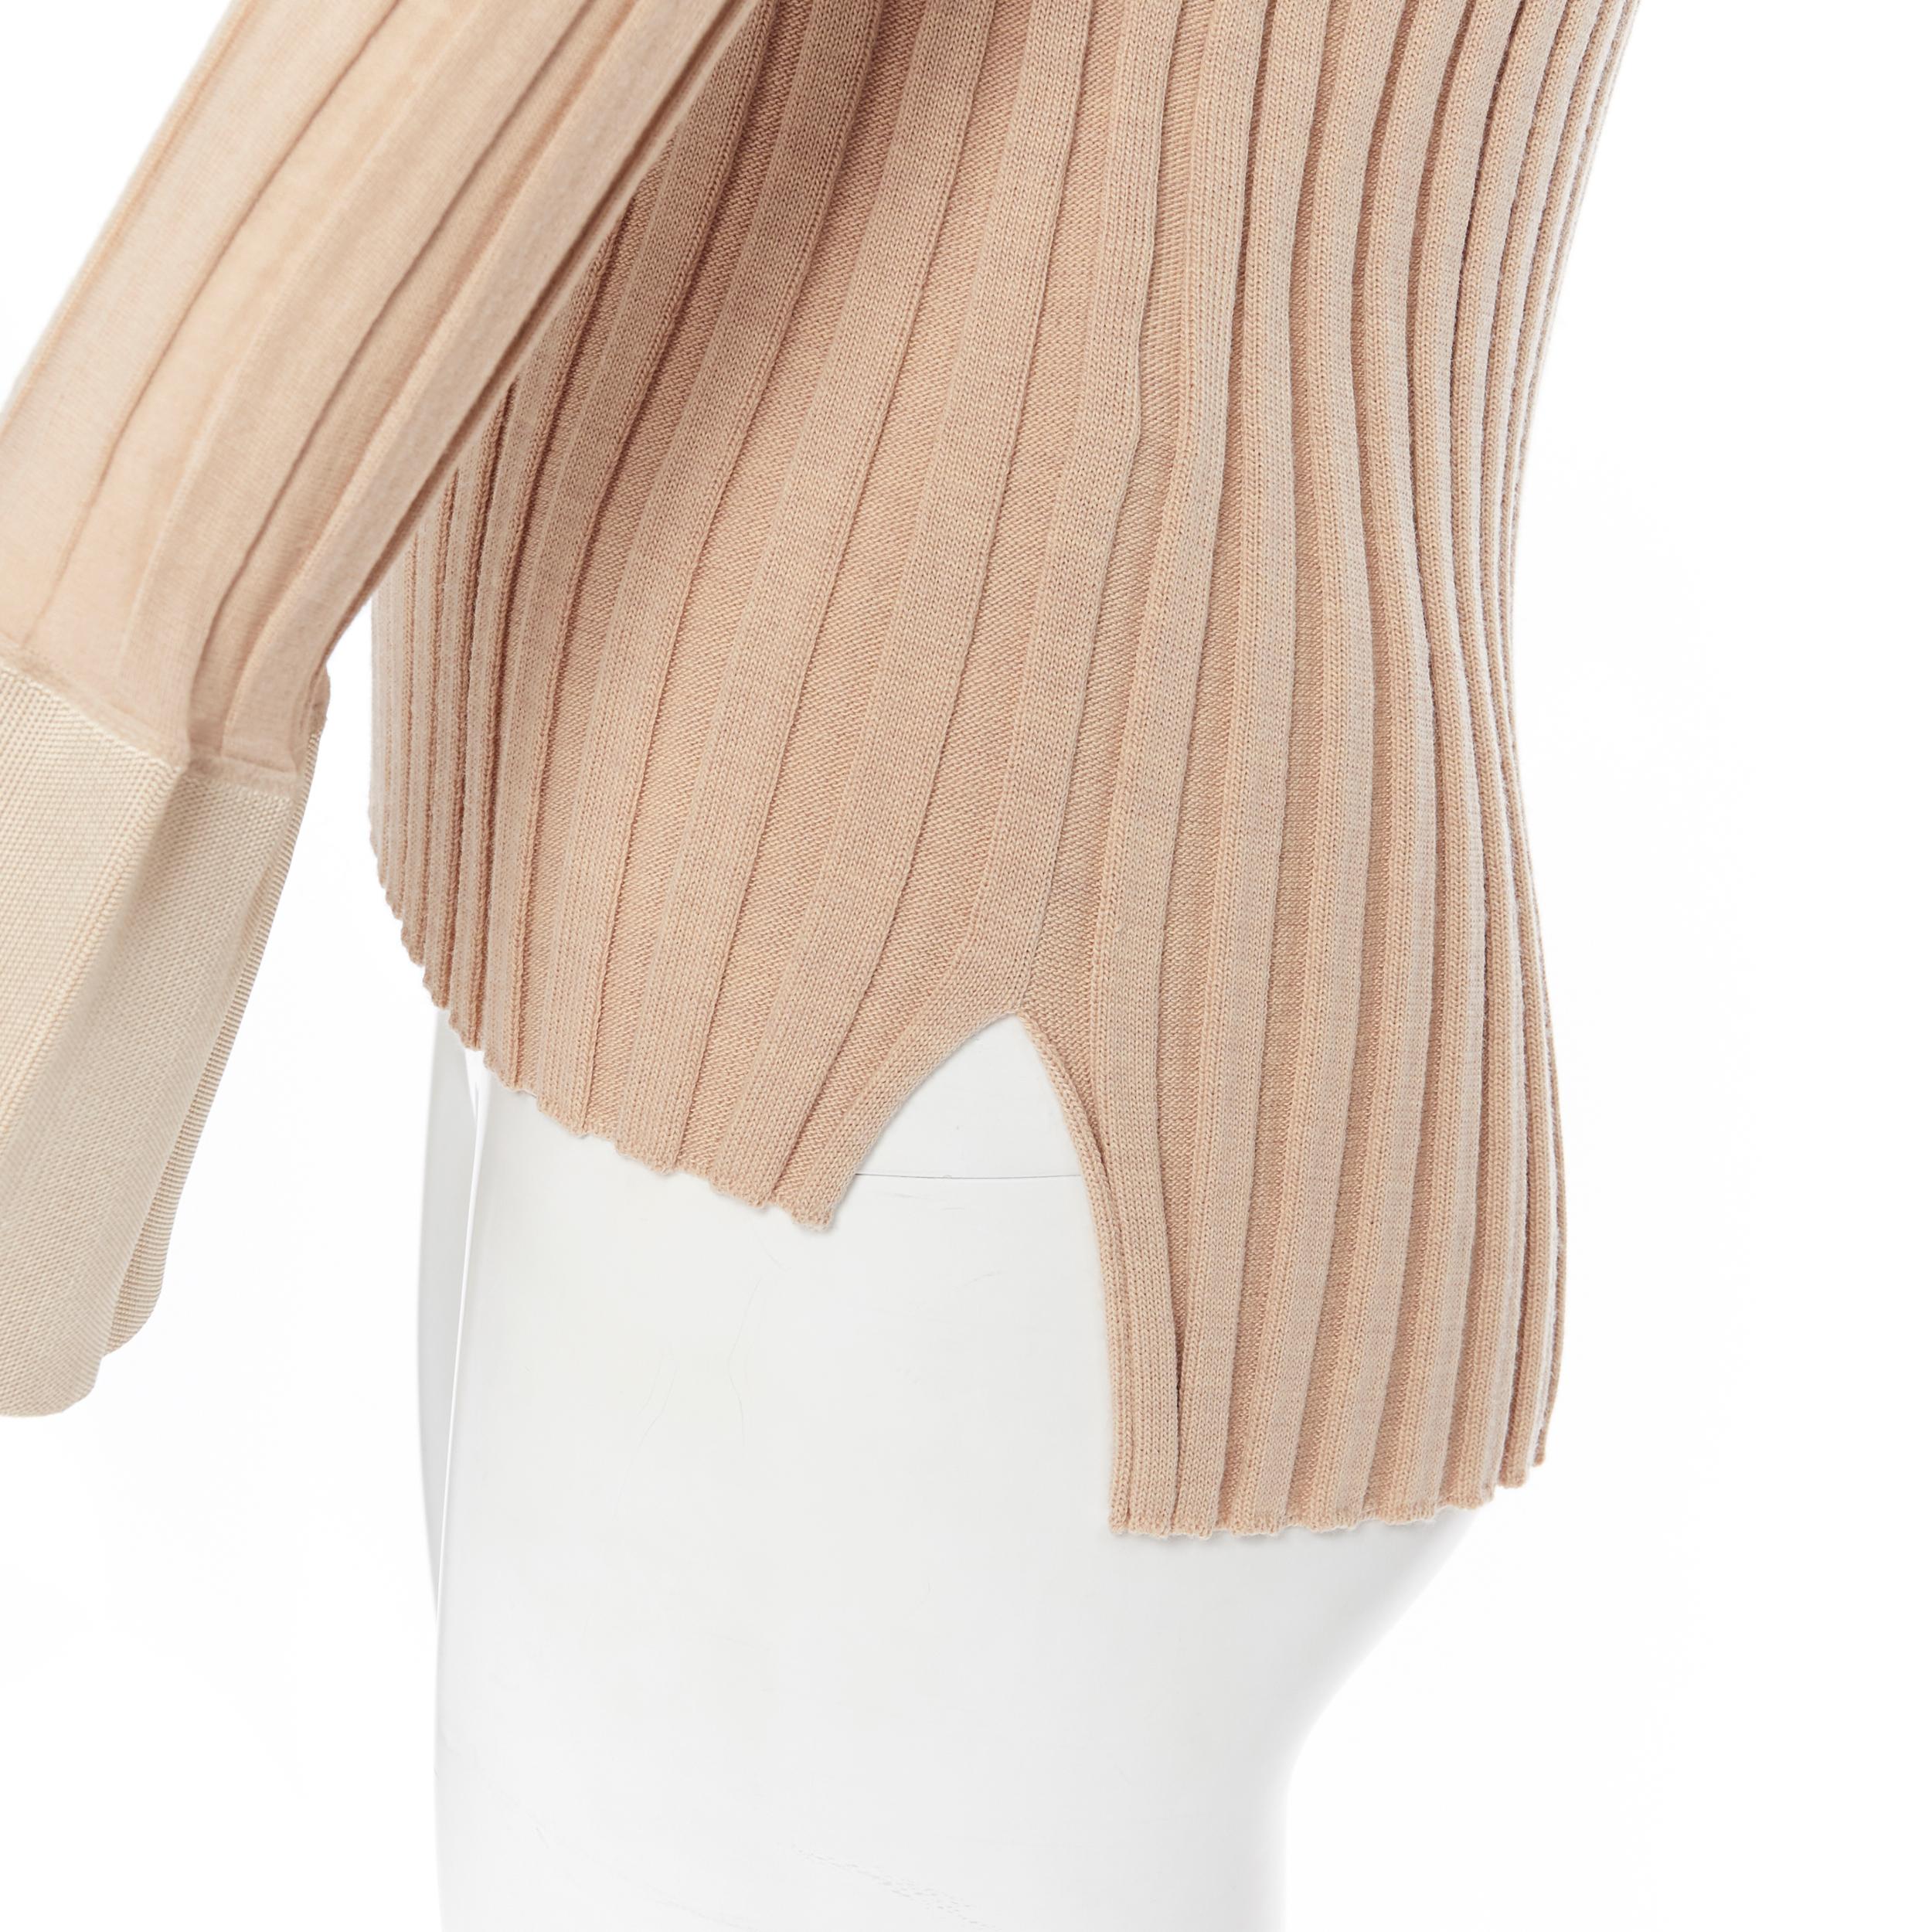 runway OLD CELINE Phoebe Philo beige ribbed knit flared bell cuff sweater top XS 2